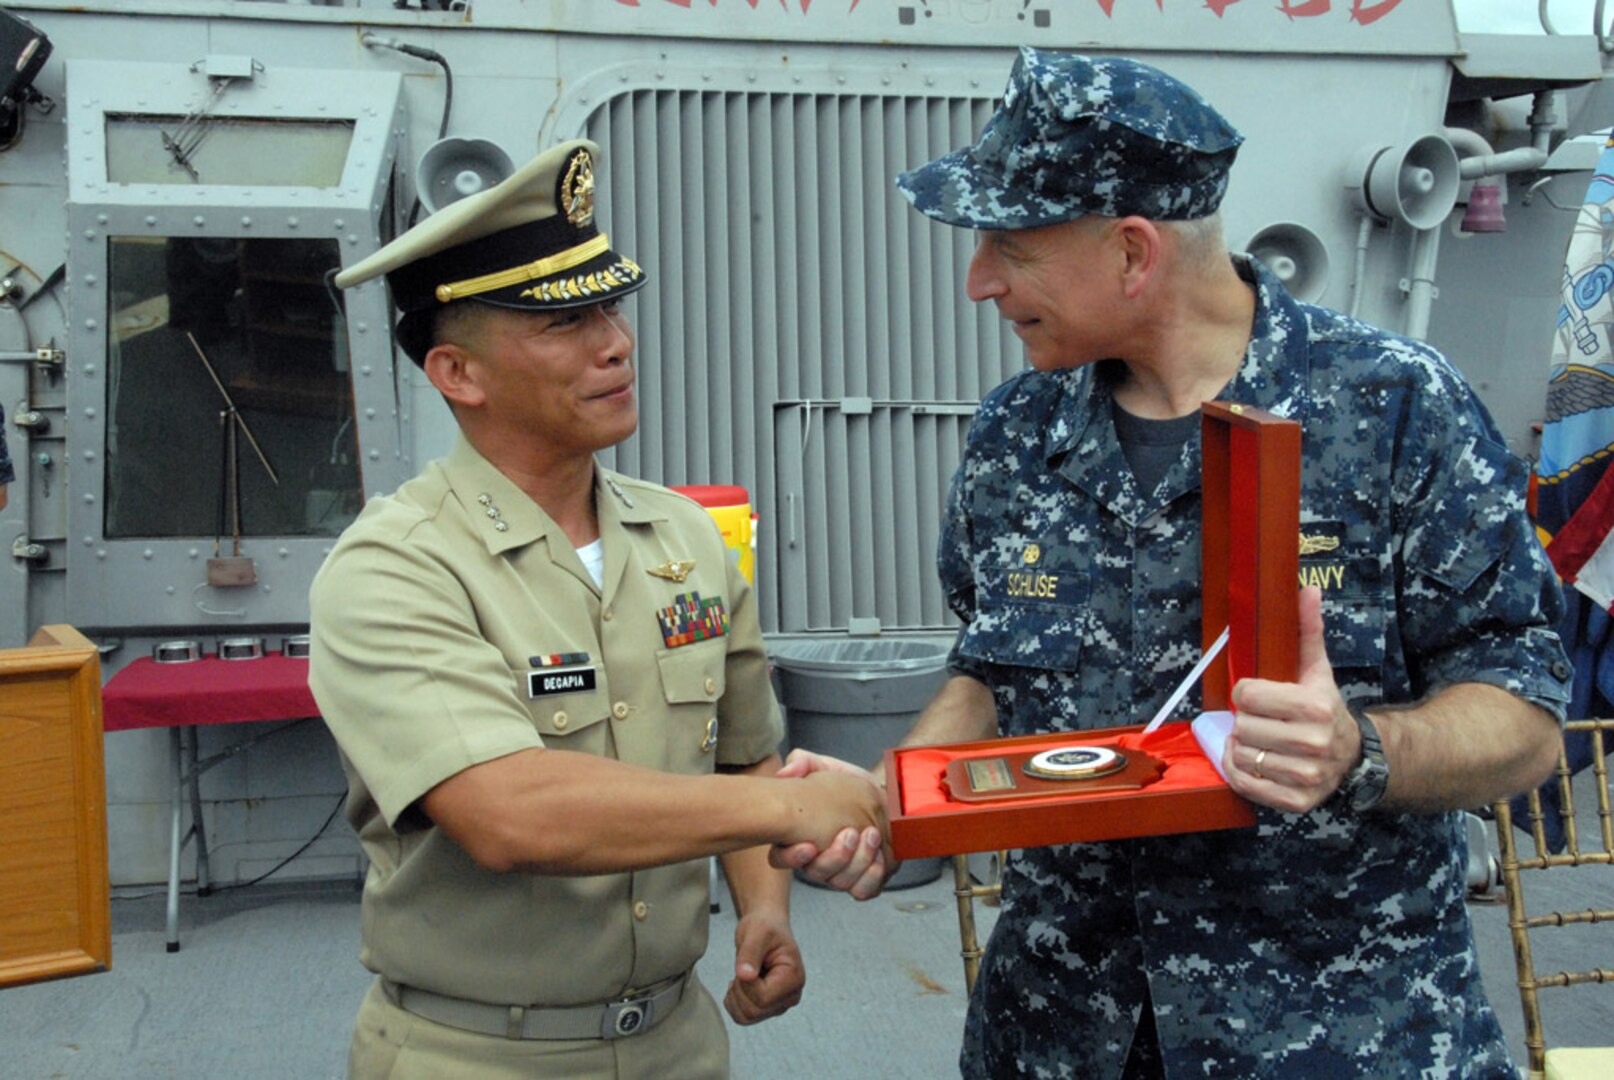 SUBIC BAY, Philippines (July 1, 2014) - Capt. Paul Schlise, commodore of Destroyer Squadron 7, accepts an award of appreciation from Capt. Karl A. Decapia of the Philippine Navy at the closing ceremony of Cooperation Afloat Readiness and Training (CARAT) 2014. In its 20th year, CARAT is an annual, bilateral exercise series with the U.S. Navy, U.S. Marine Corps and the armed forces of nine partner nations including Bangladesh, Brunei, Cambodia, Indonesia, Malaysia, the Philippines, Singapore, Thailand and Timor-Leste. (U.S. Navy photo by Mass Communication Specialist 1st Class Jerry Jimenez) 140701-N-PK322-086